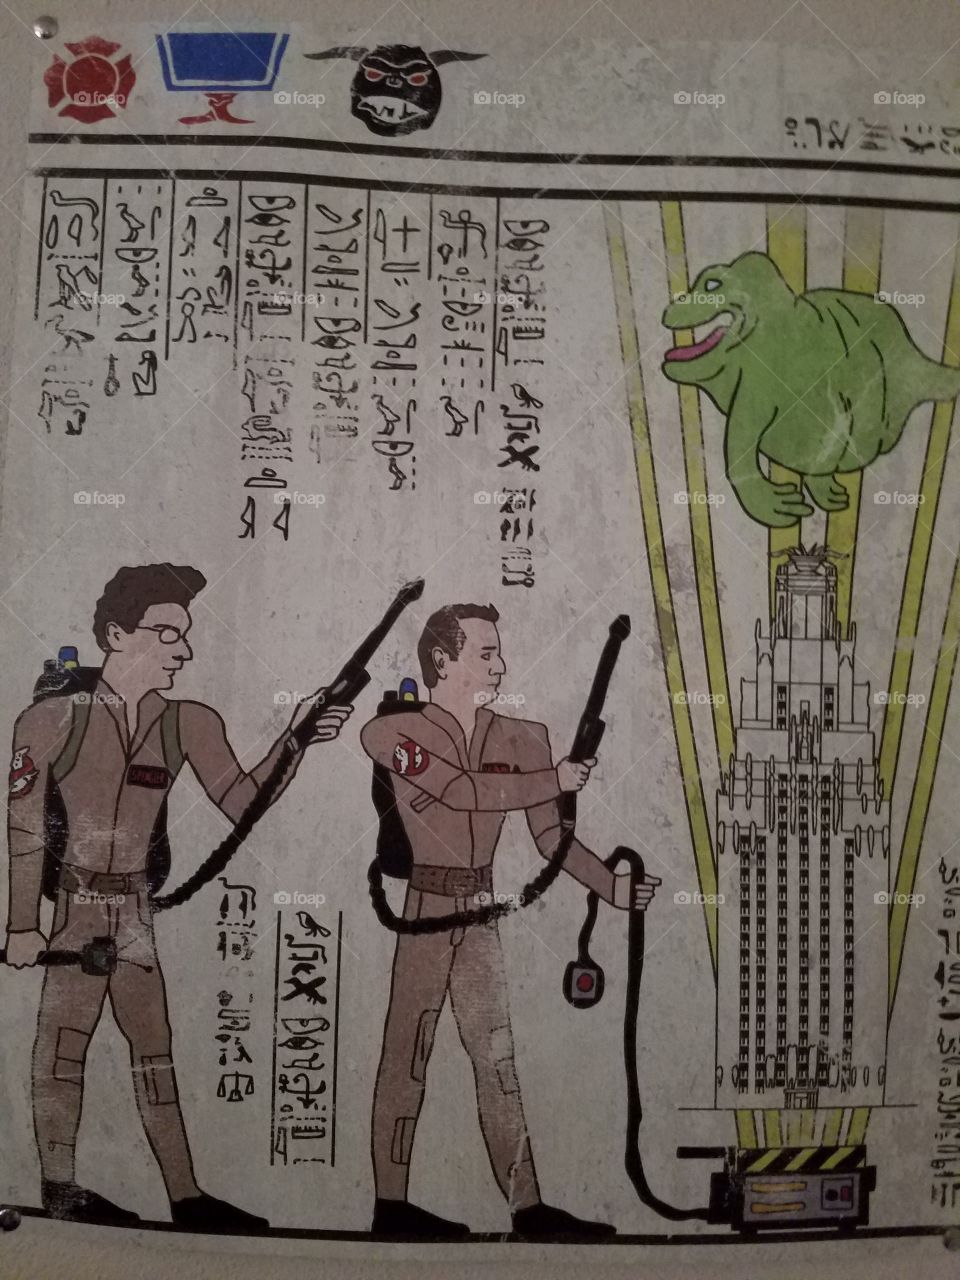 The Ghostbusters somehow ended up on a wall in ancient Egypt.  ;)